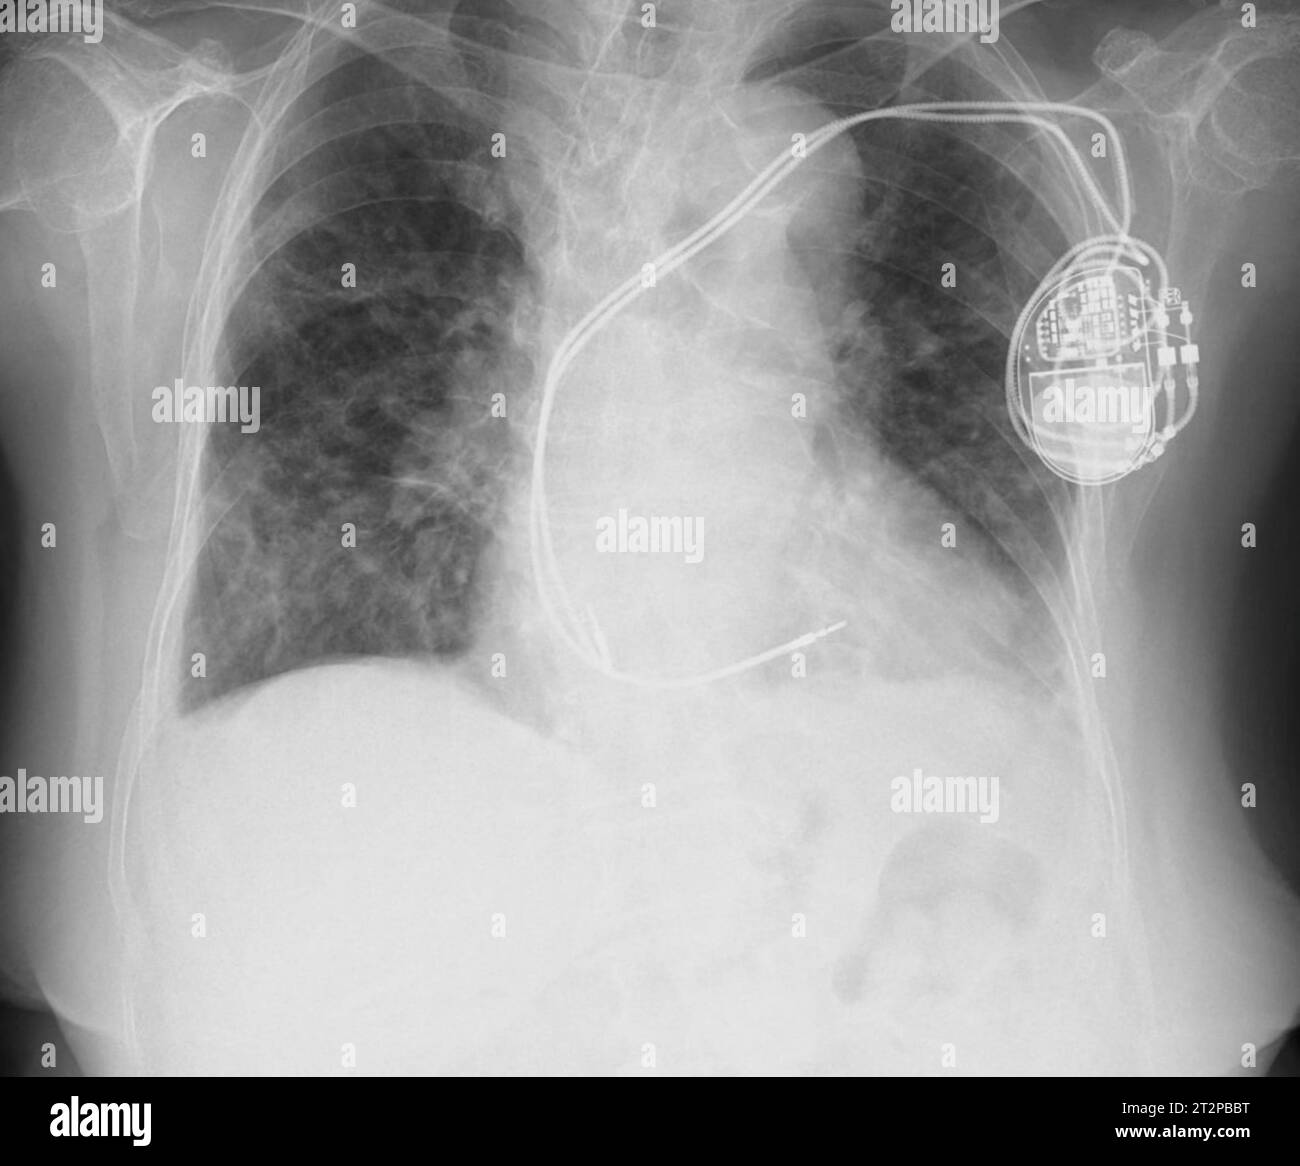 Pacemaker, X-ray Stock Photo